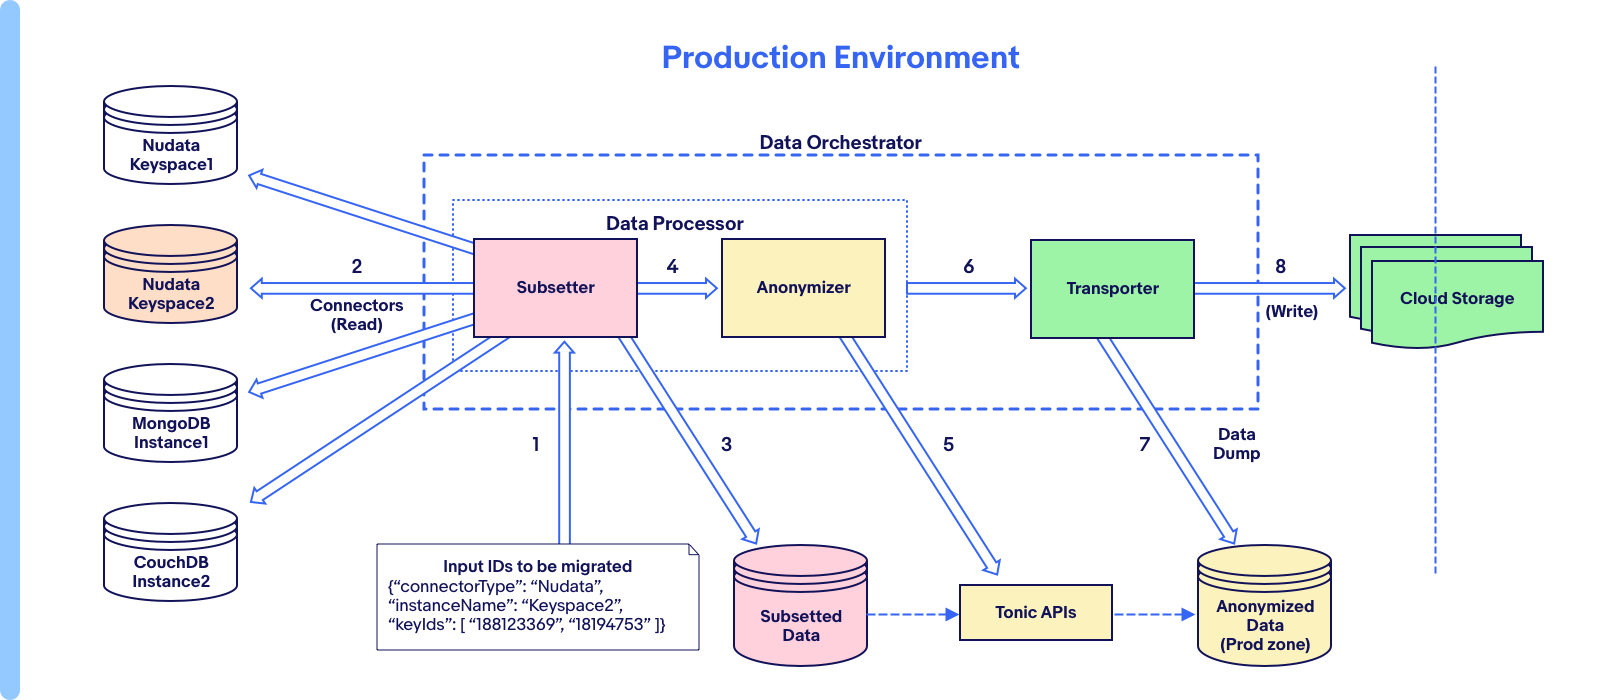 A flow chart showing the production environment